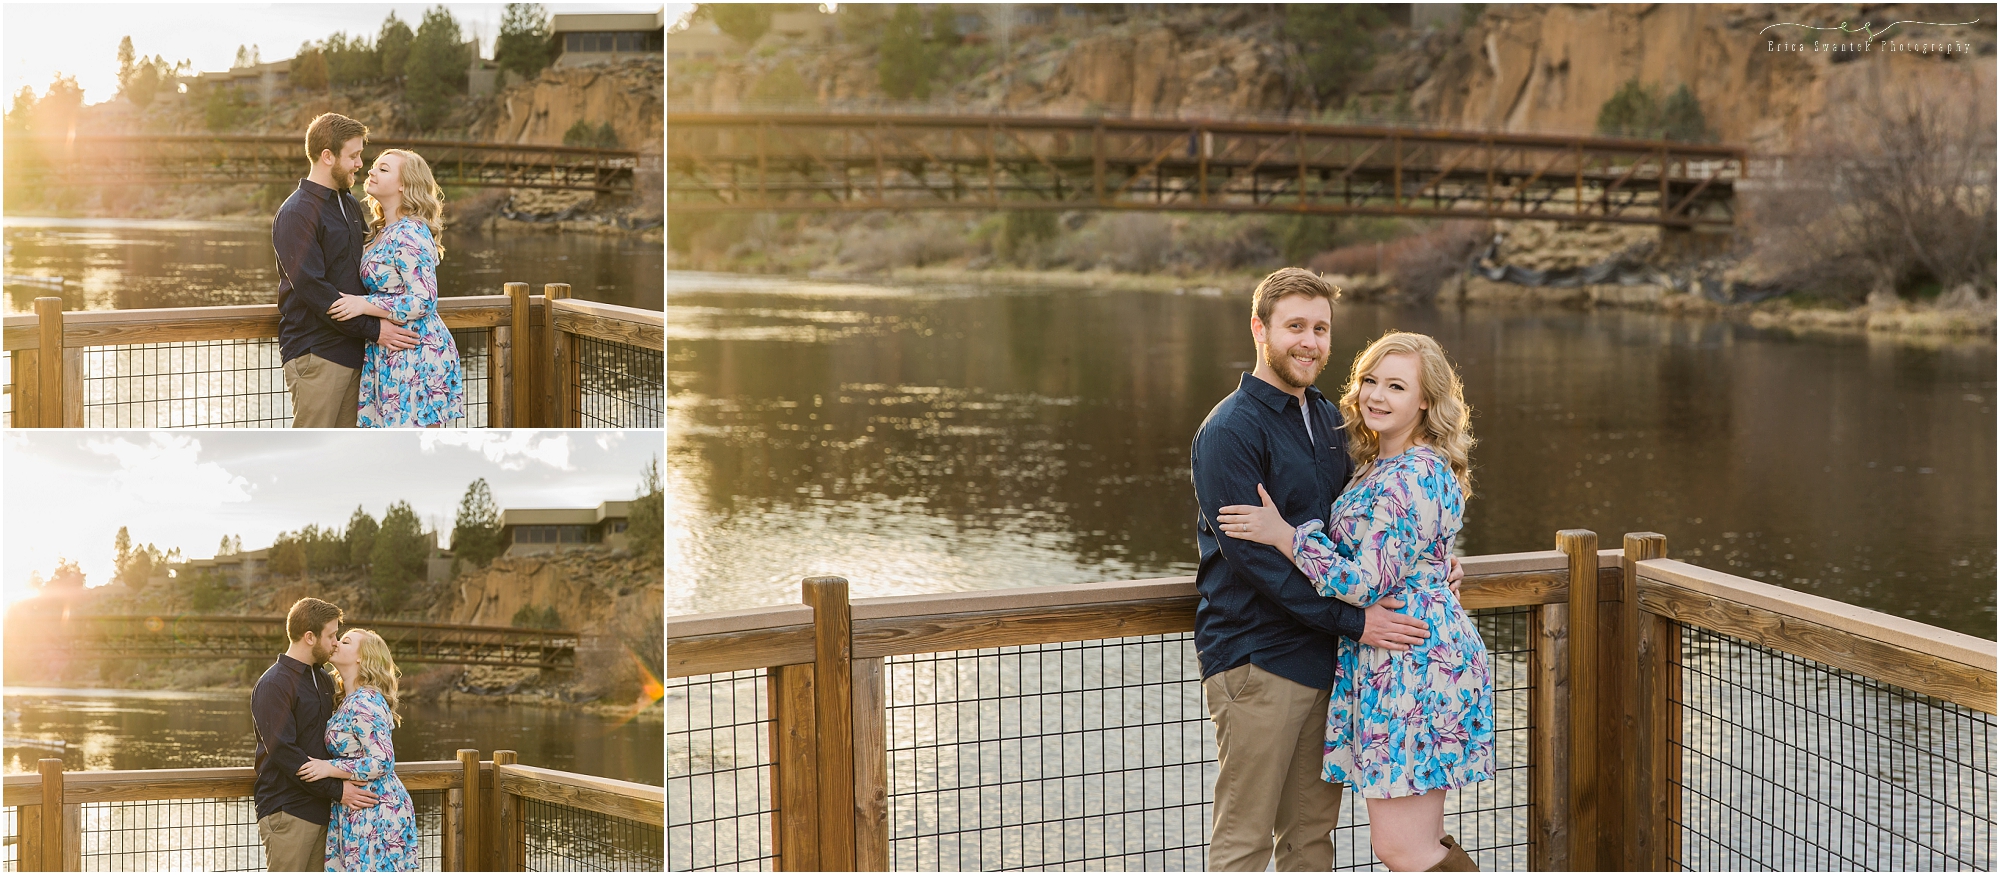 A gorgeous golden hour sunset for Bend Oregon wedding photographer Erica Swantek at this Deschutes River spring engagement session. 